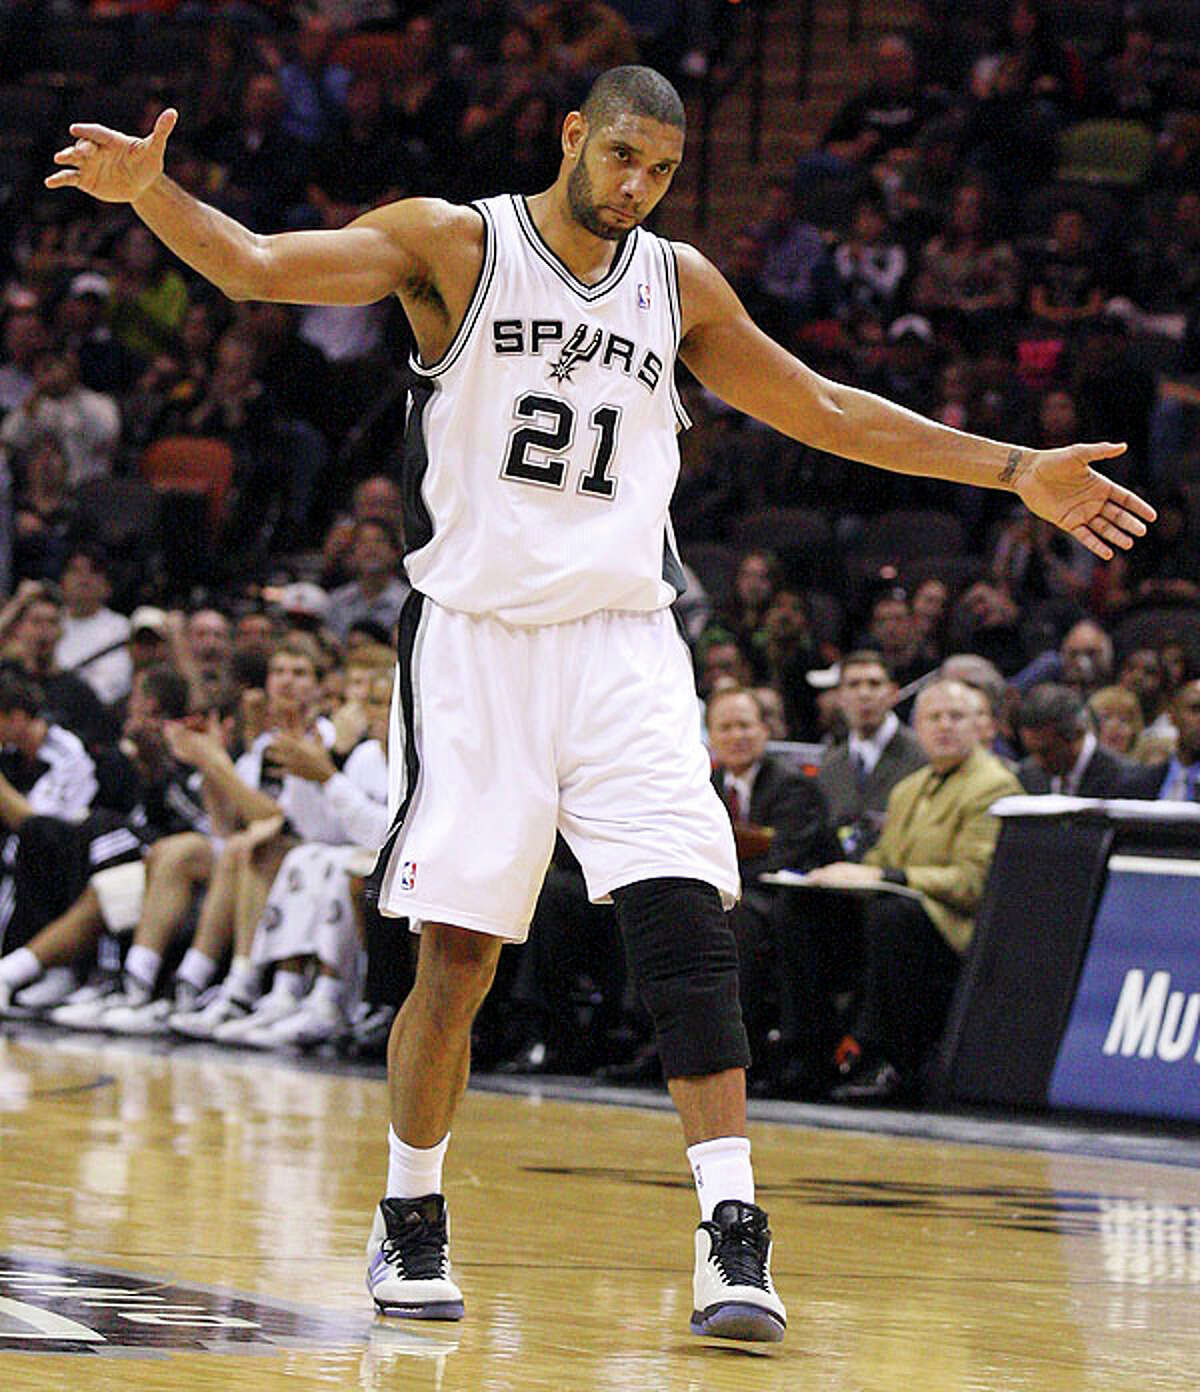 Spurs' Tim Duncan  reacts after scoring against the Thunder during second half action Saturday.